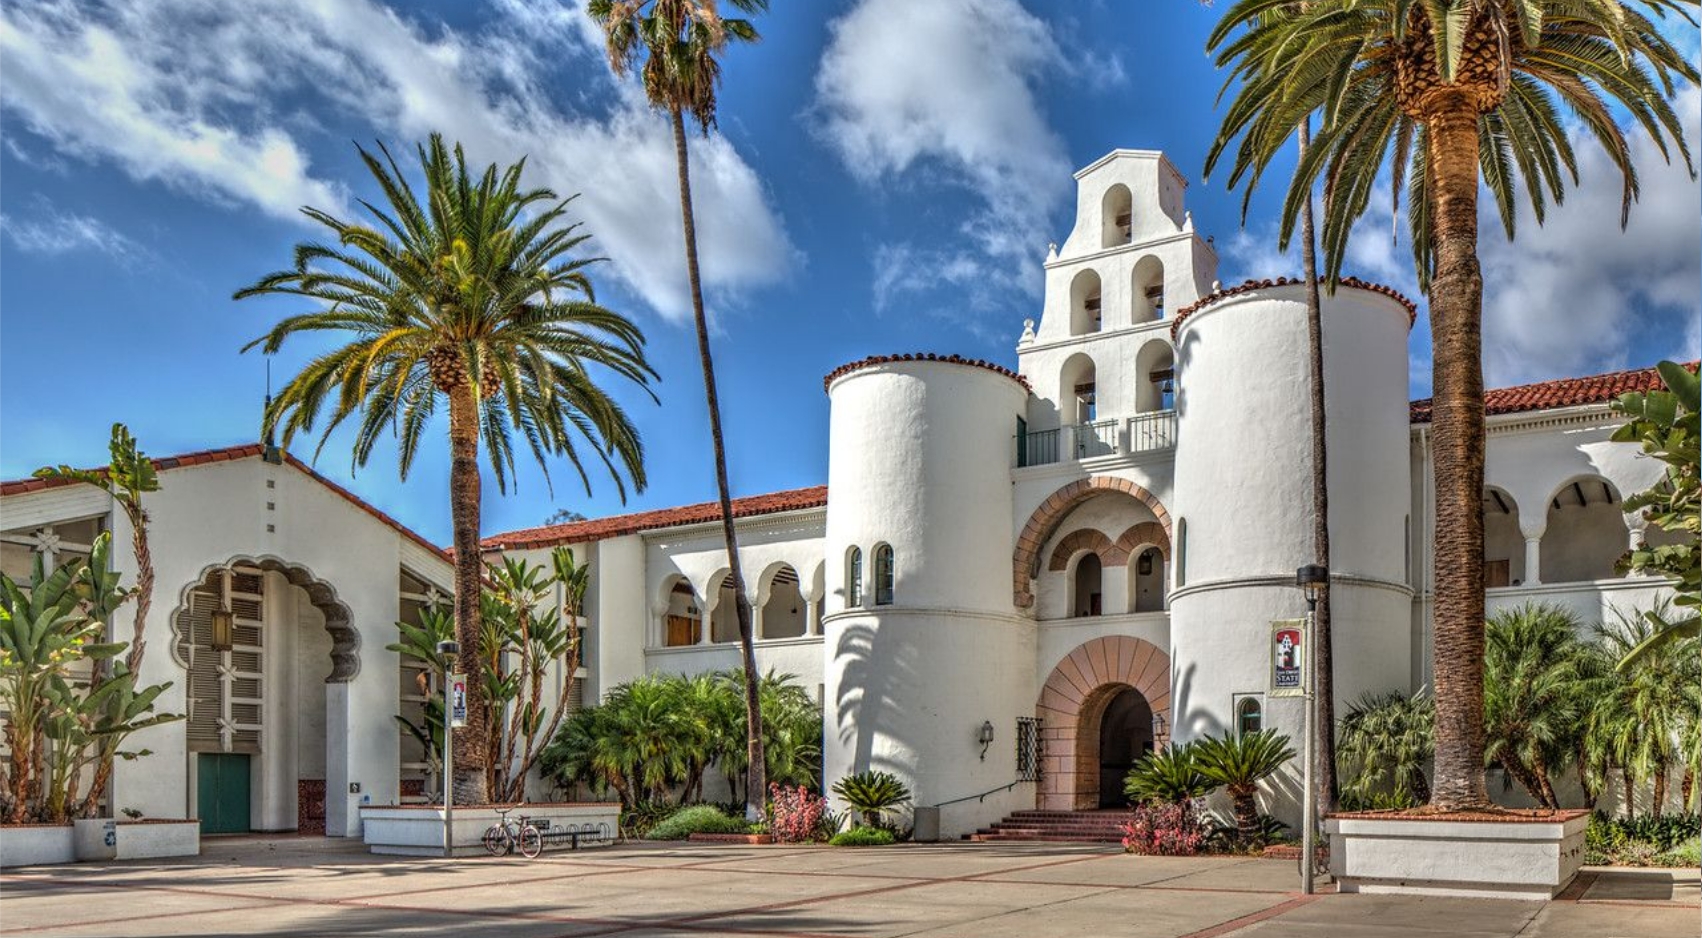 The image features San Diego State University's Hepner Hall.